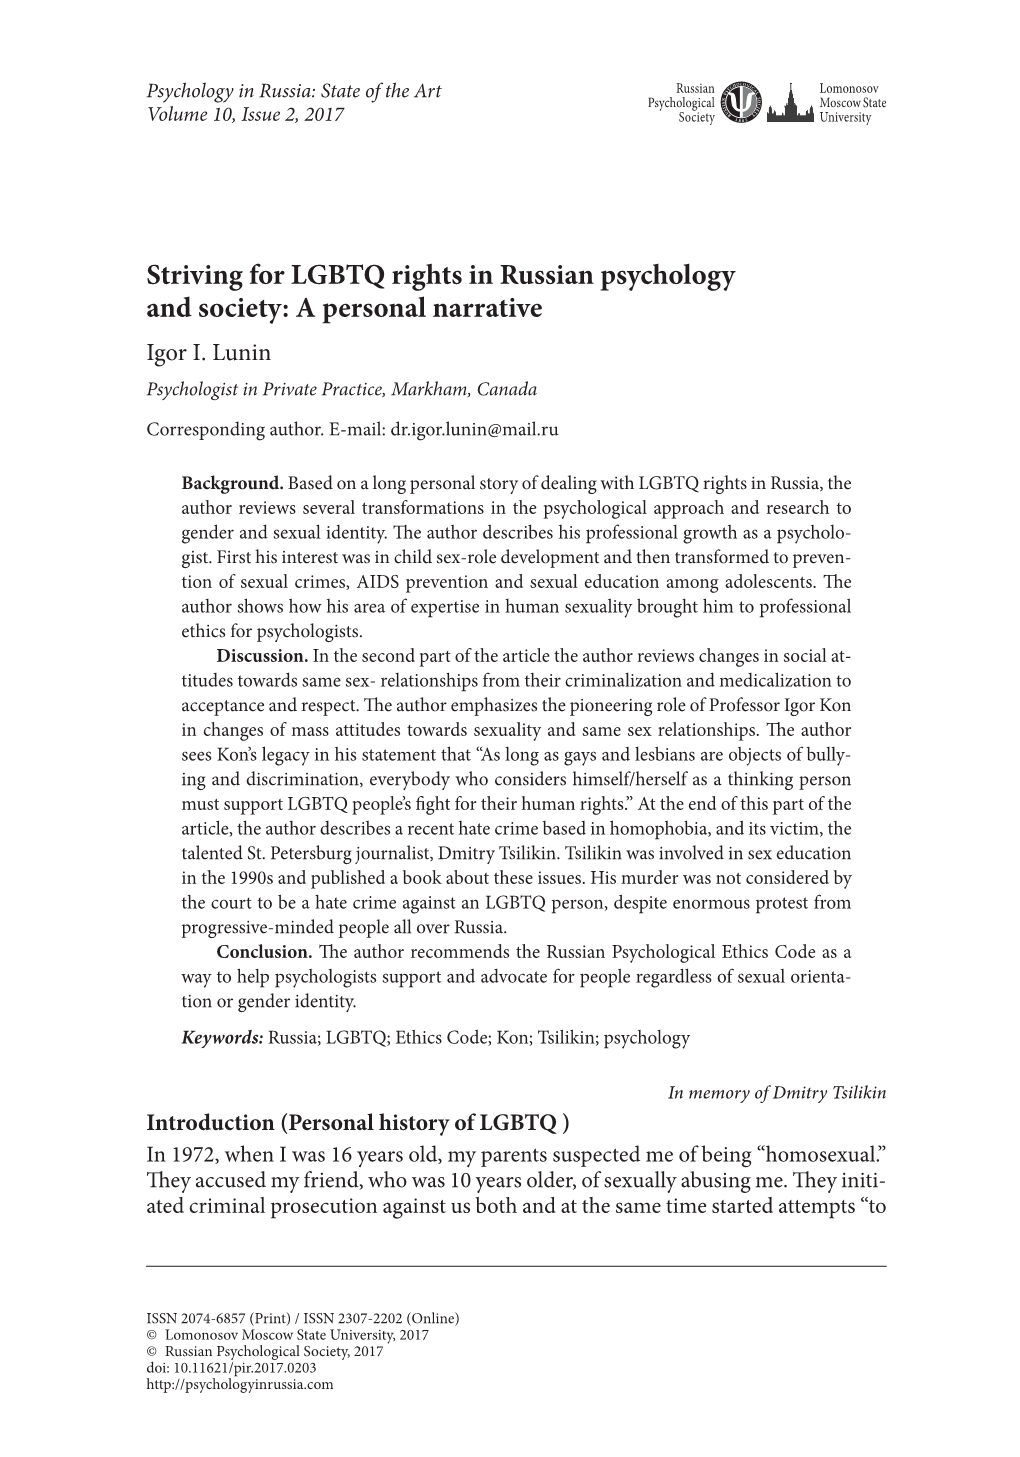 Striving for LGBTQ Rights in Russian Psychology and Society: a Personal Narrative Igor I